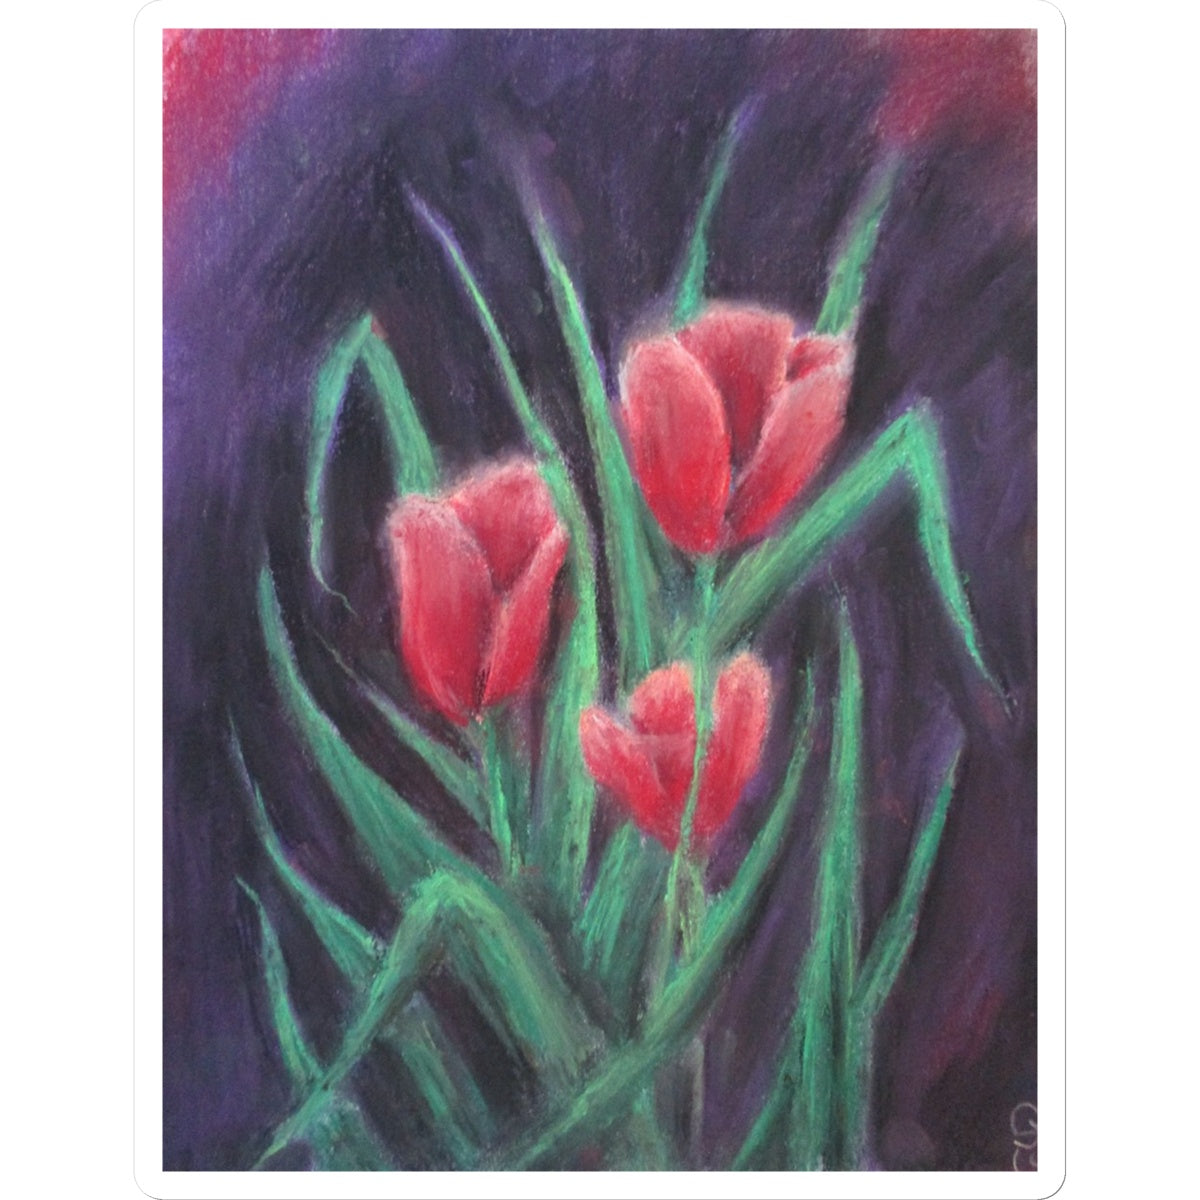 Poet and her Soul Speaking Paintings ~ prints, originals and more  Colours of pink and red Loves true wed Peeking out and hiding The colour red confiding   Original Artwork and Poetry of Artist Jen Shearer  This is a original painting printed on product.